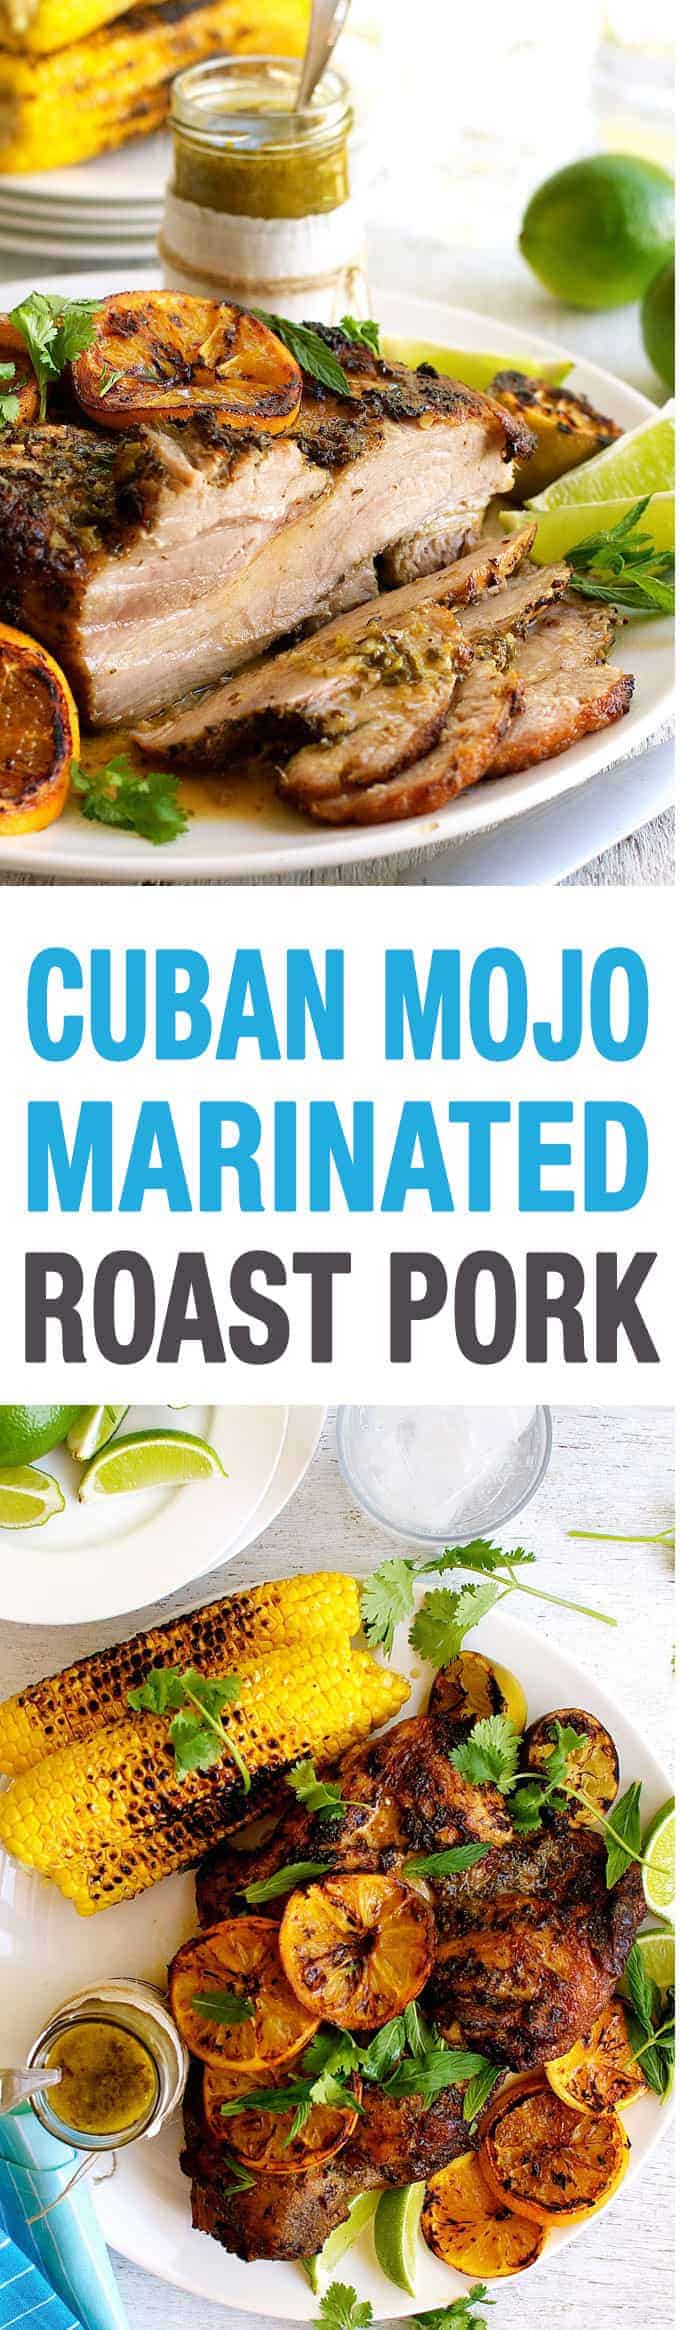 Pork marinated in Cuban mojo - the real recipe for "Chief" movie, created by Roy Choi.  Easy to make, amazing flavor, virtually foolproof.